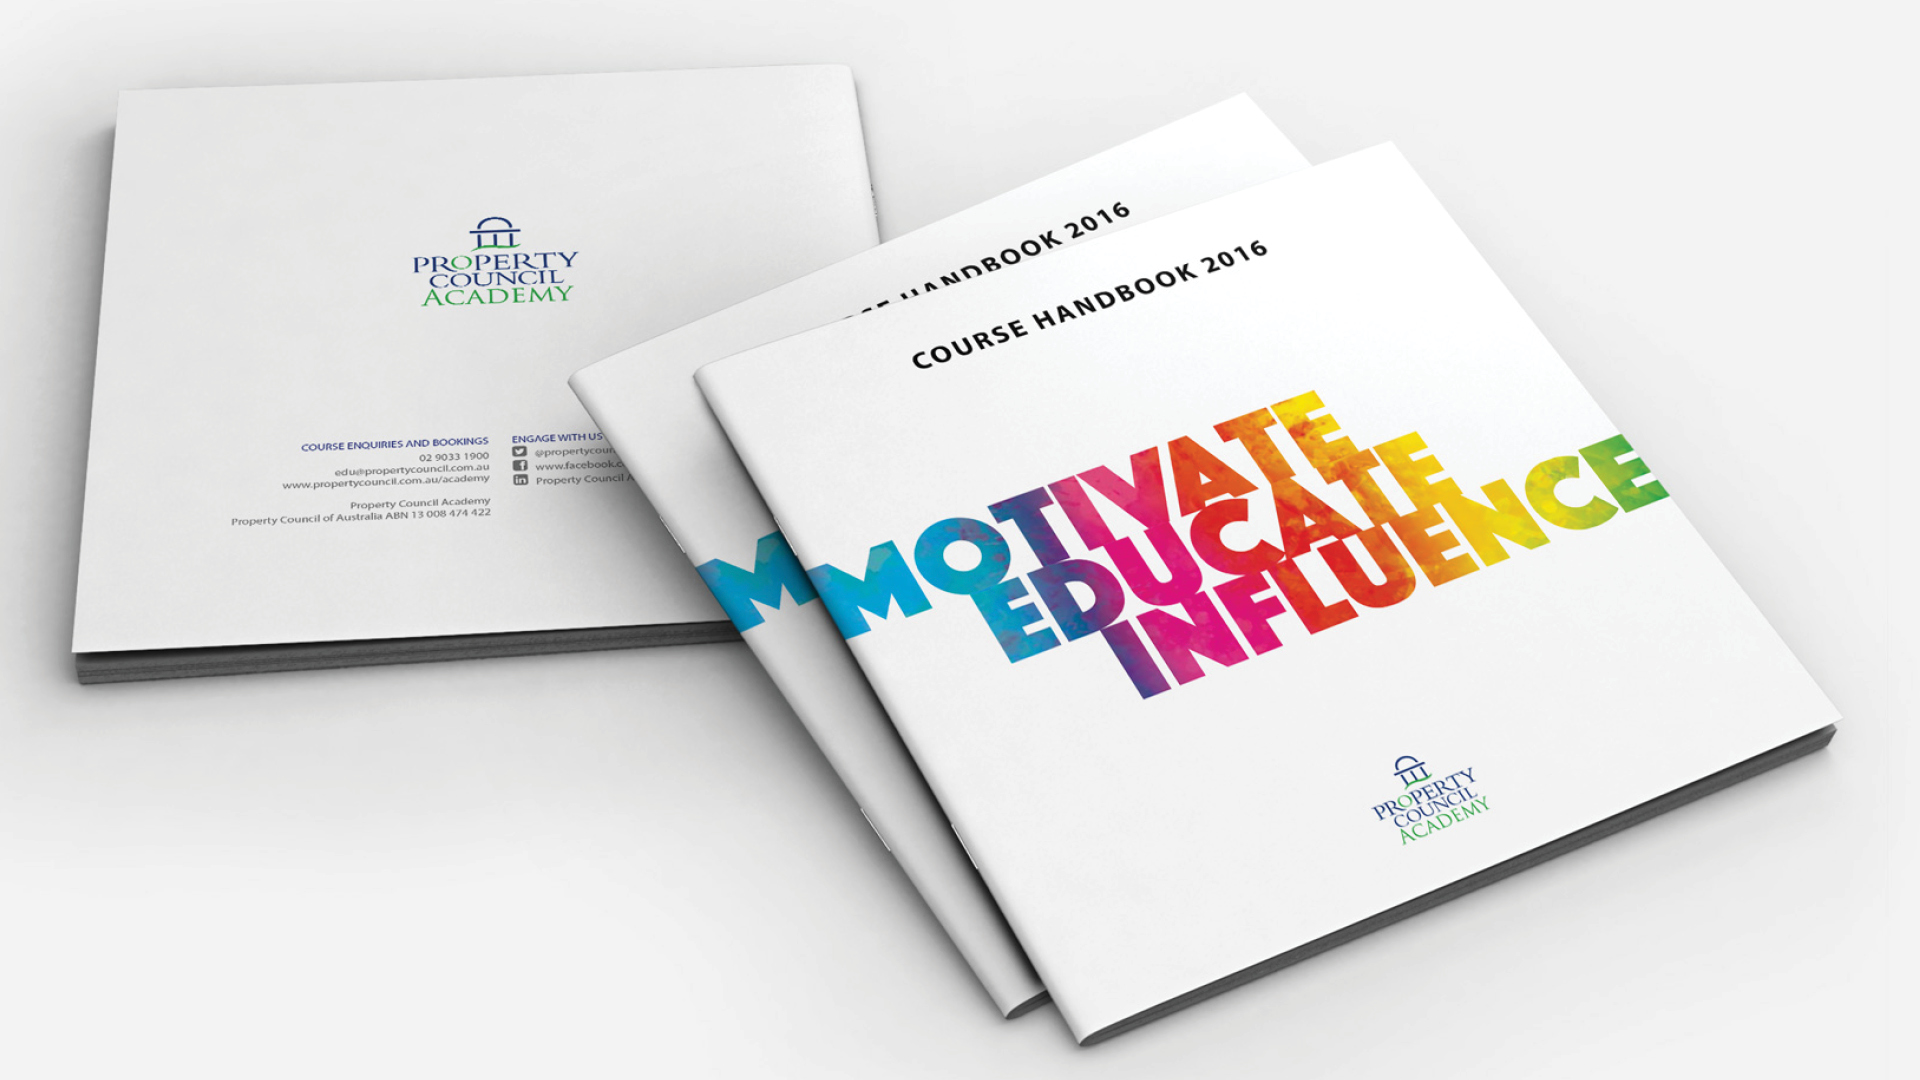 Property Academy Courses Collateral by Think Creative Agency